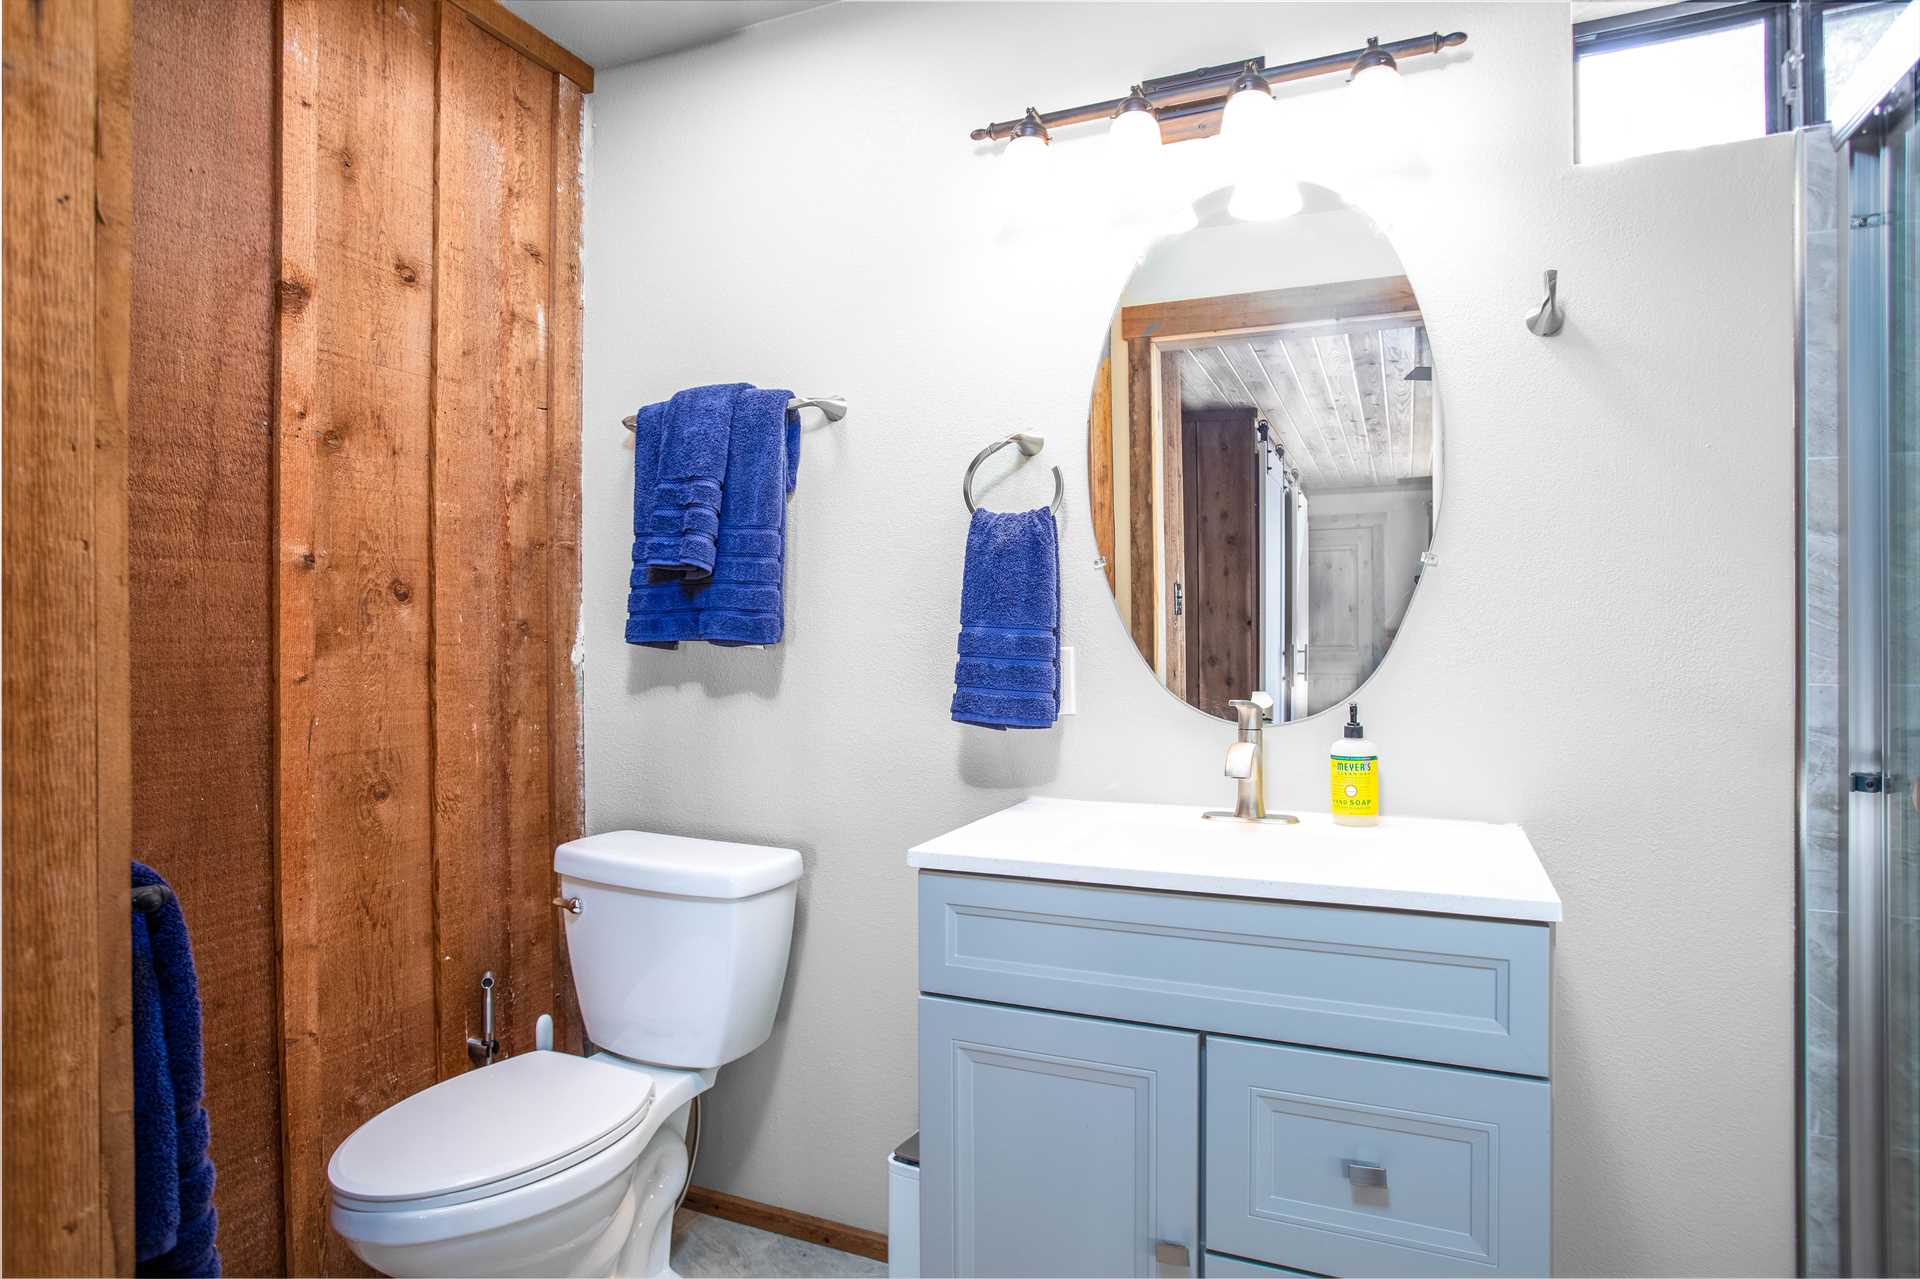                                                 Fresh linens and a roomy shower make cleanup a snap and a pleasure in the master bath!